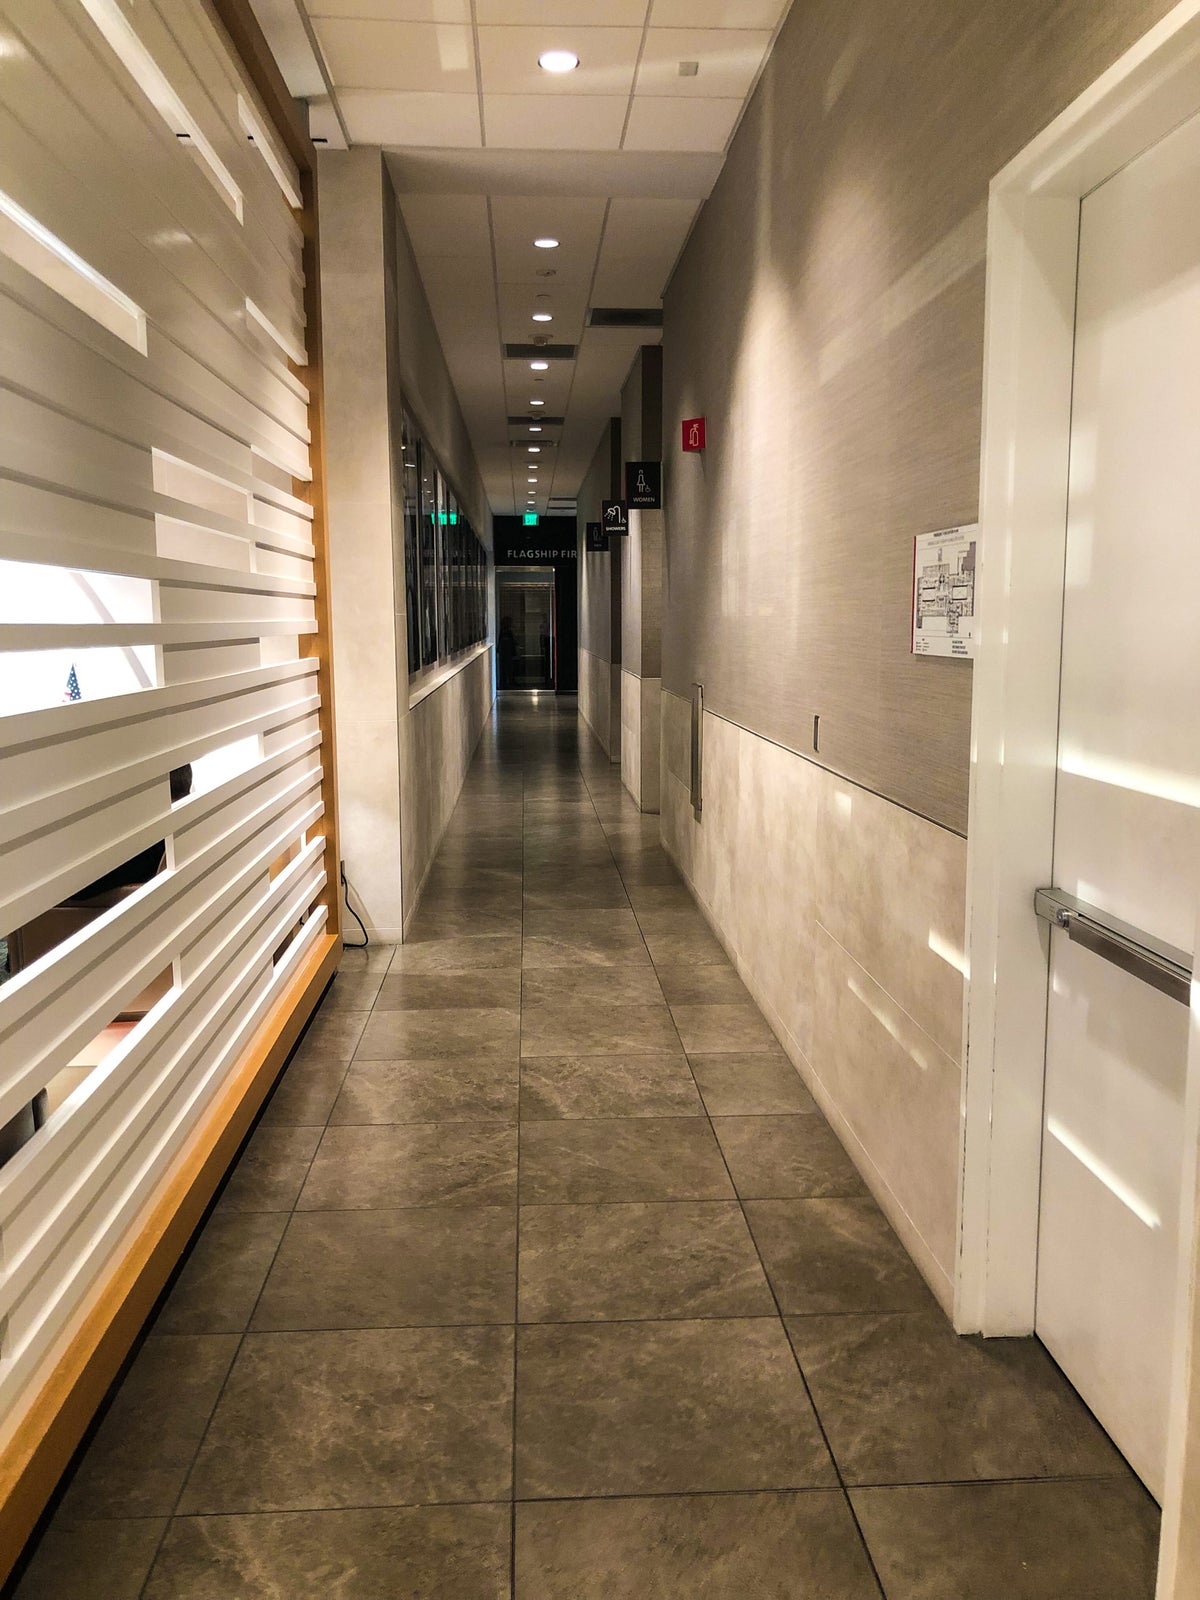 American Airlines Flagship Lounge LAX walkway to Flagship First Dining